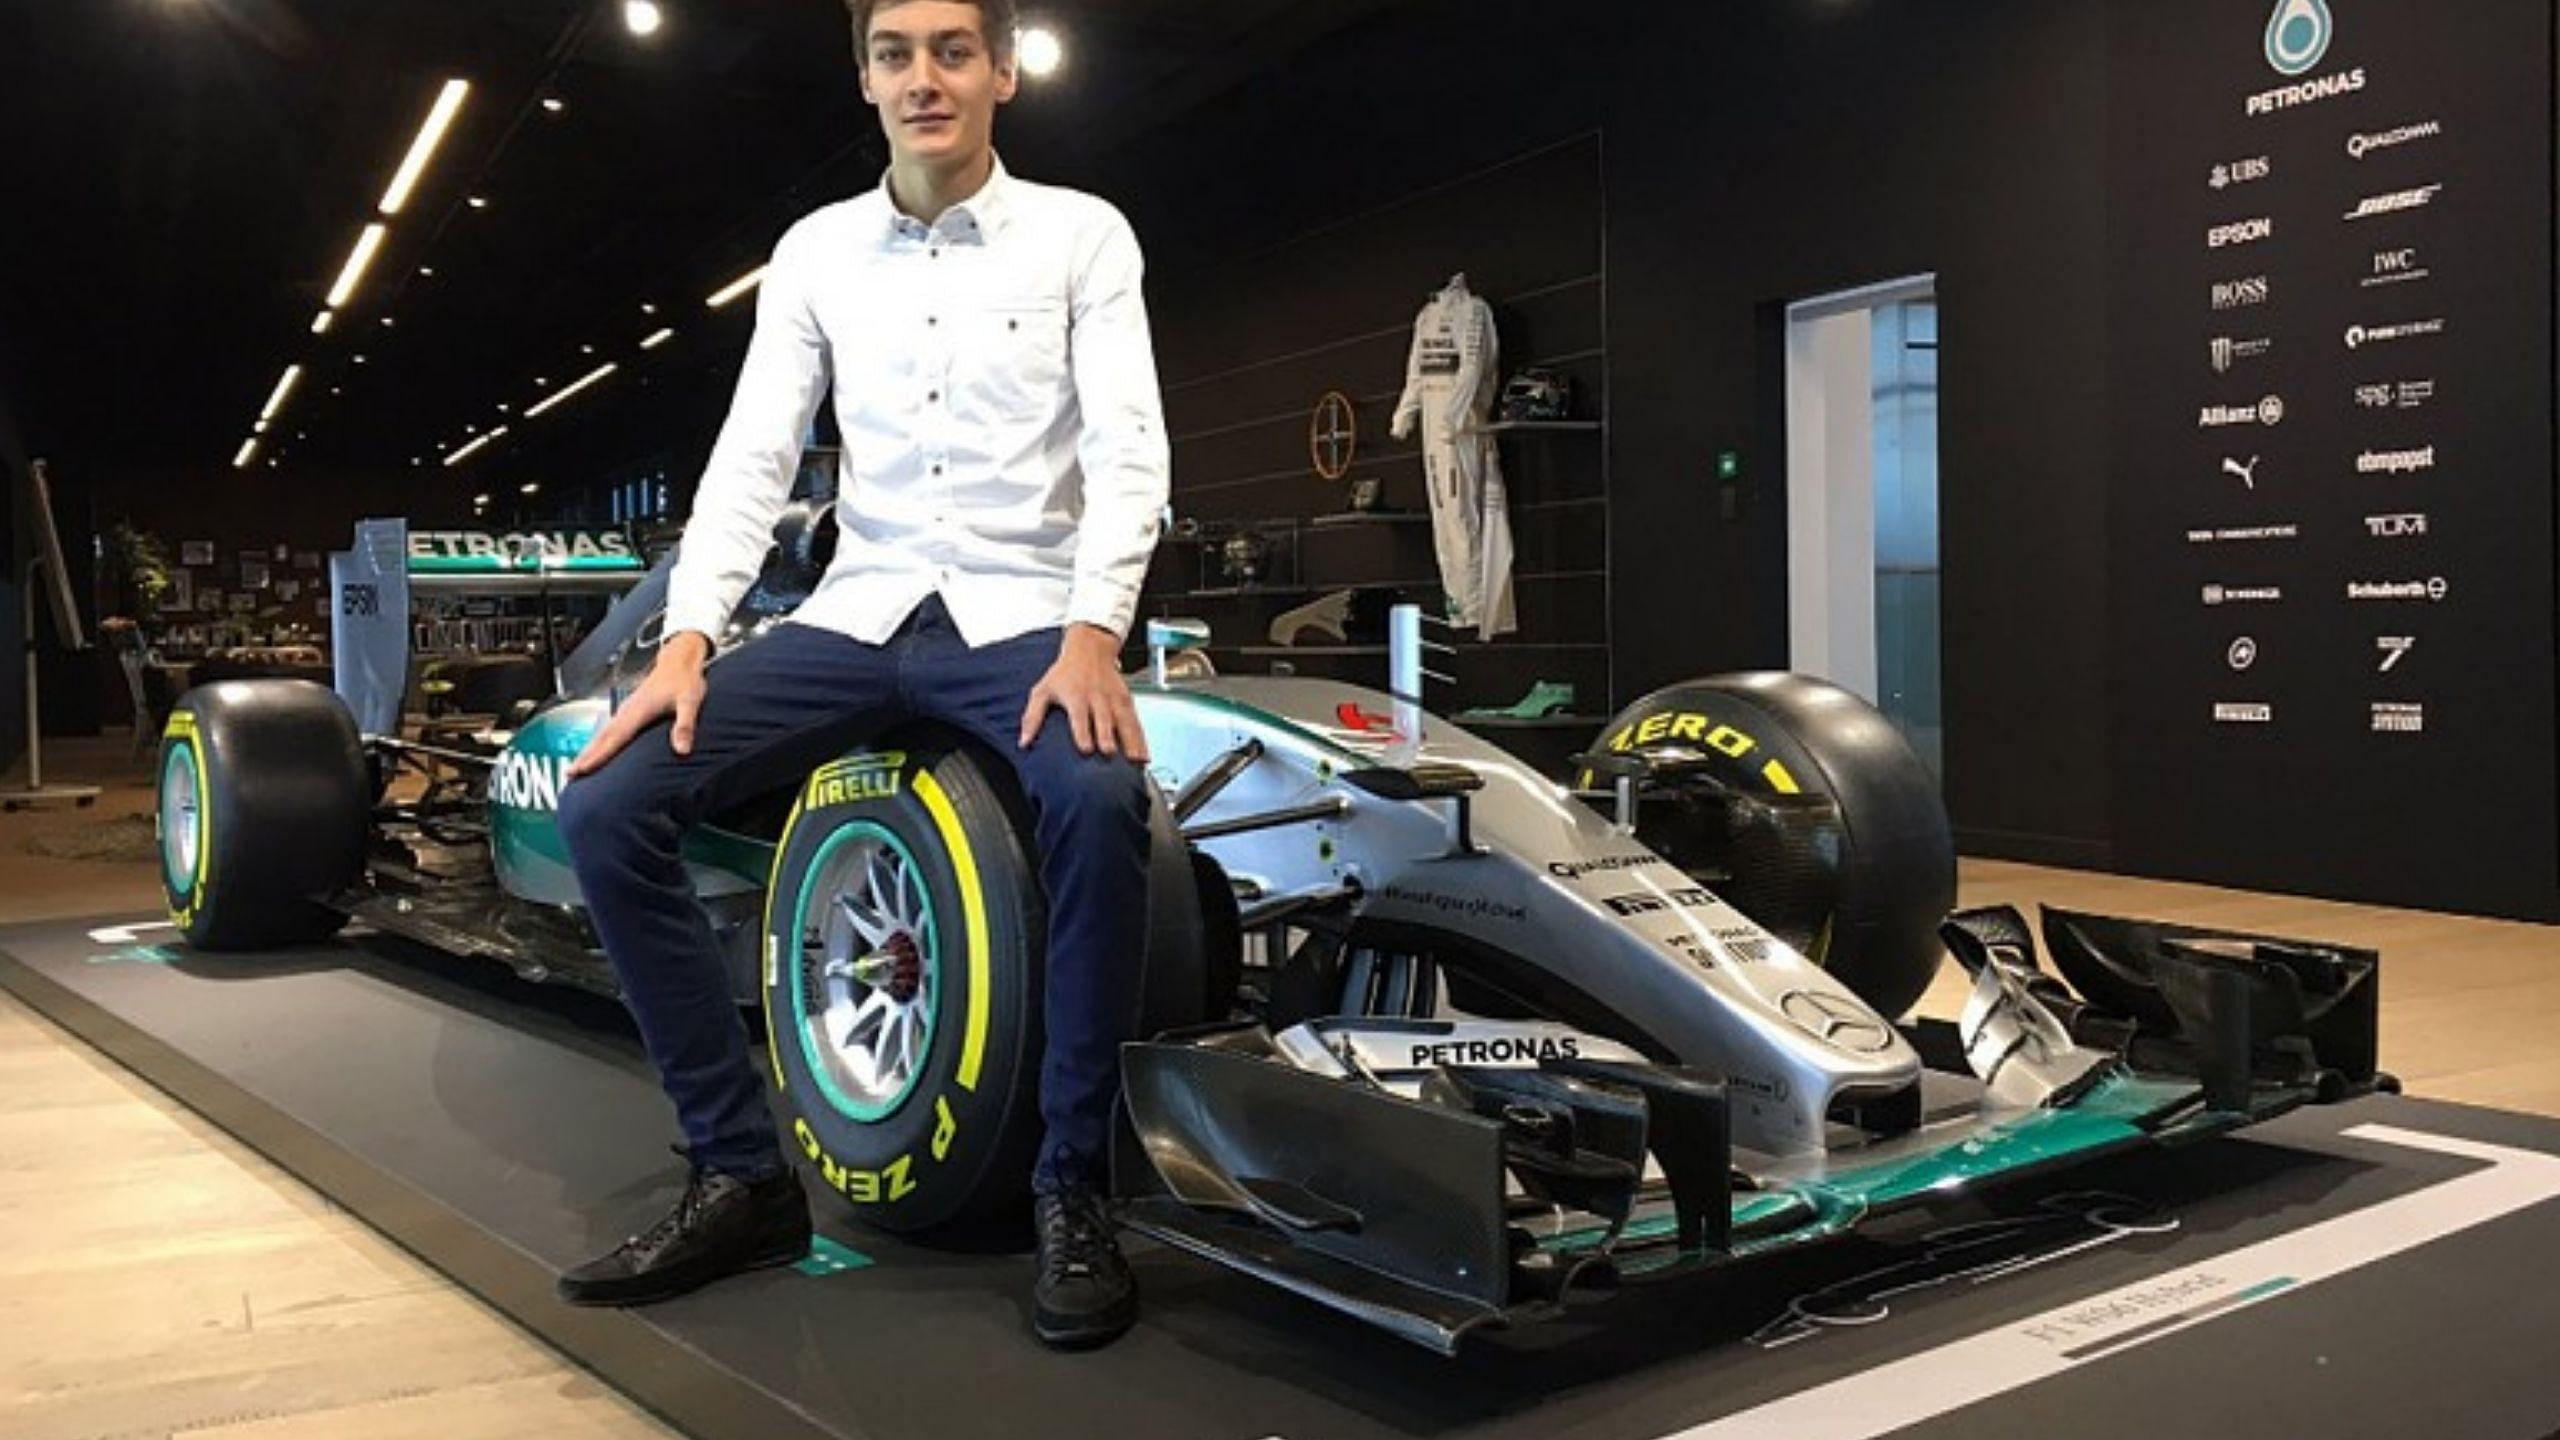 WATCH: George Russell living his dreams as he steps inside the Mercedes W11 replacing Lewis Hamilton